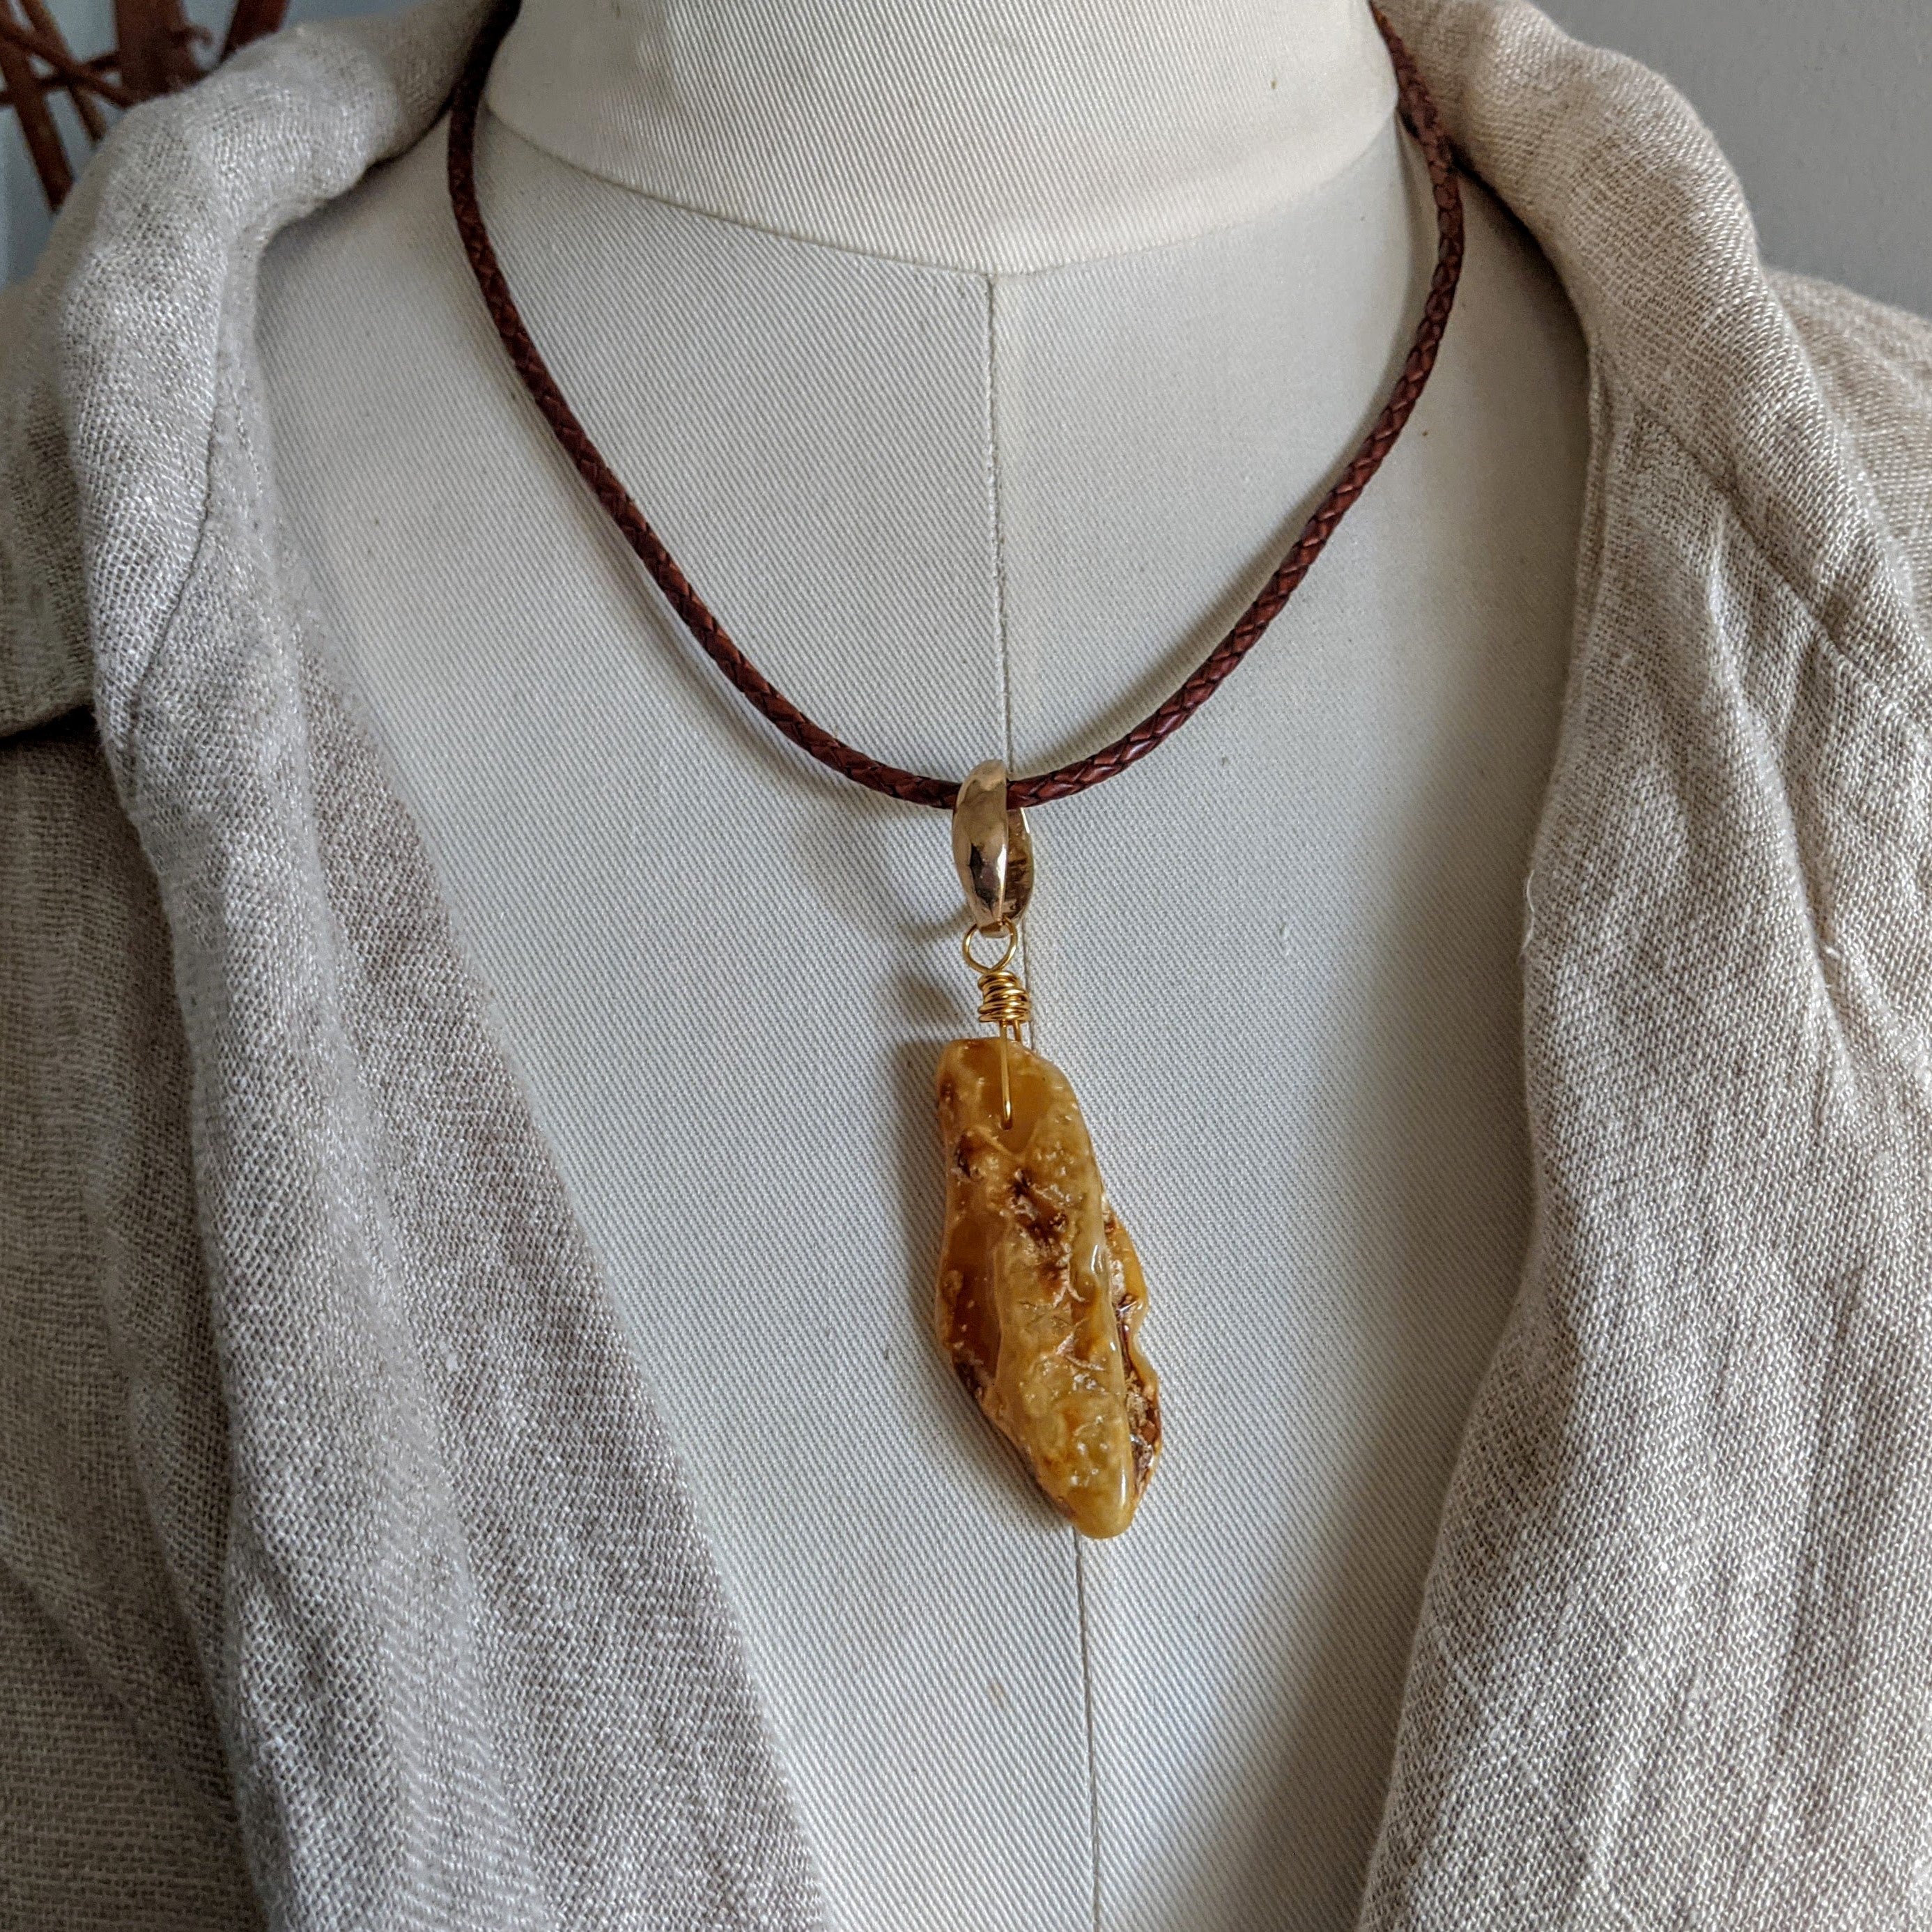 Buttersctch amber rustic pendant. Leather amber necklace. Earthy organic jewelry. Handcrafted by Aurora Creative Jewellery.